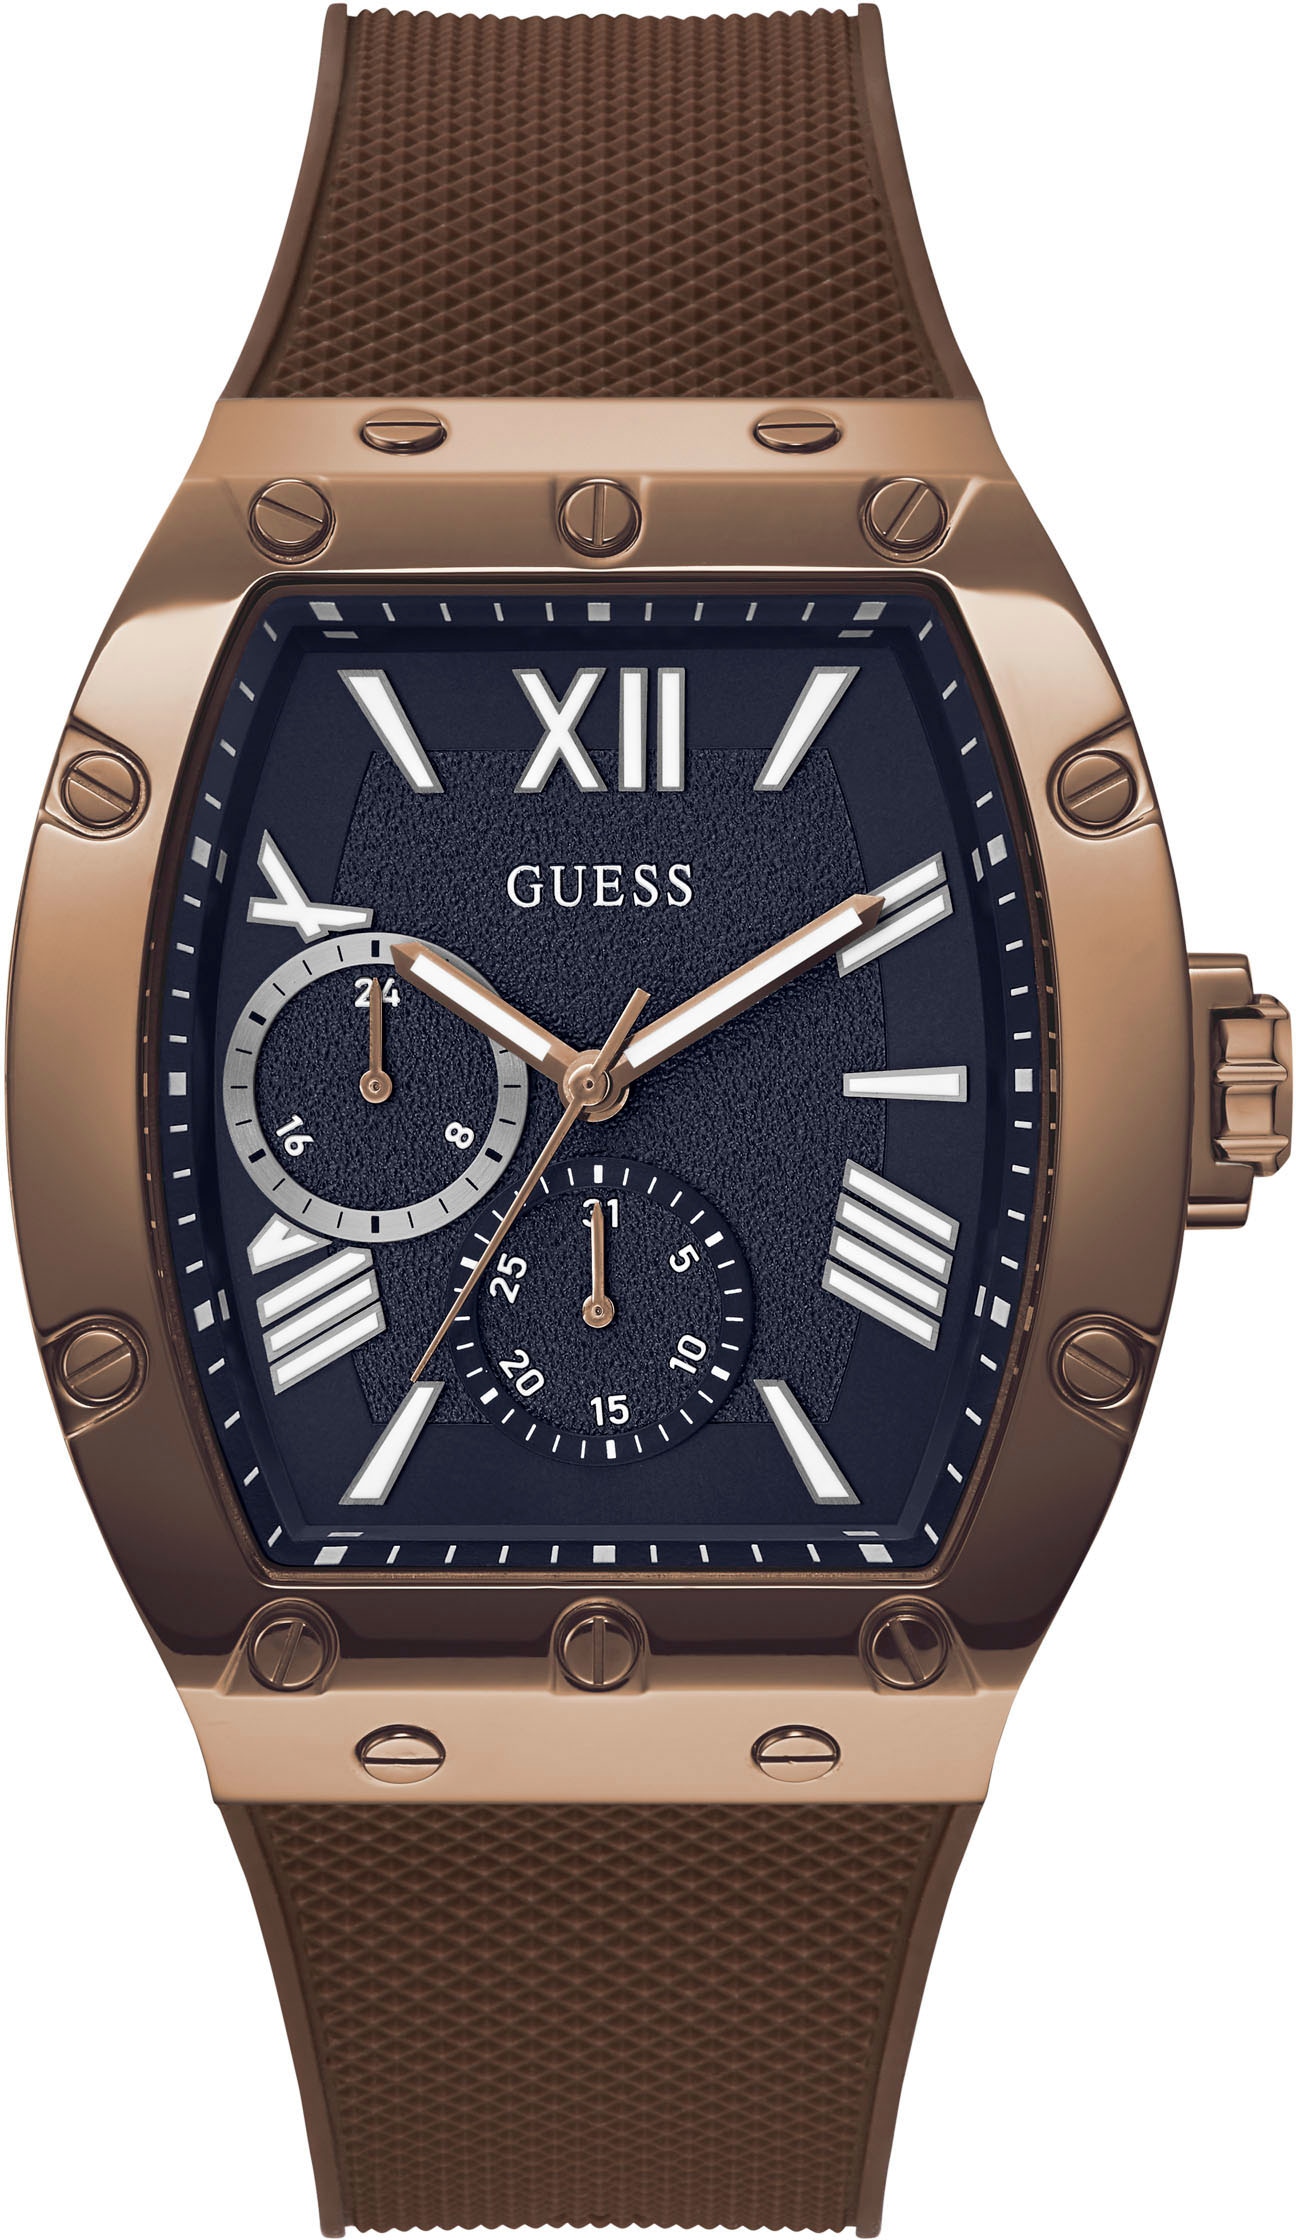 Guess Multifunktionsuhr »GW0568G1«